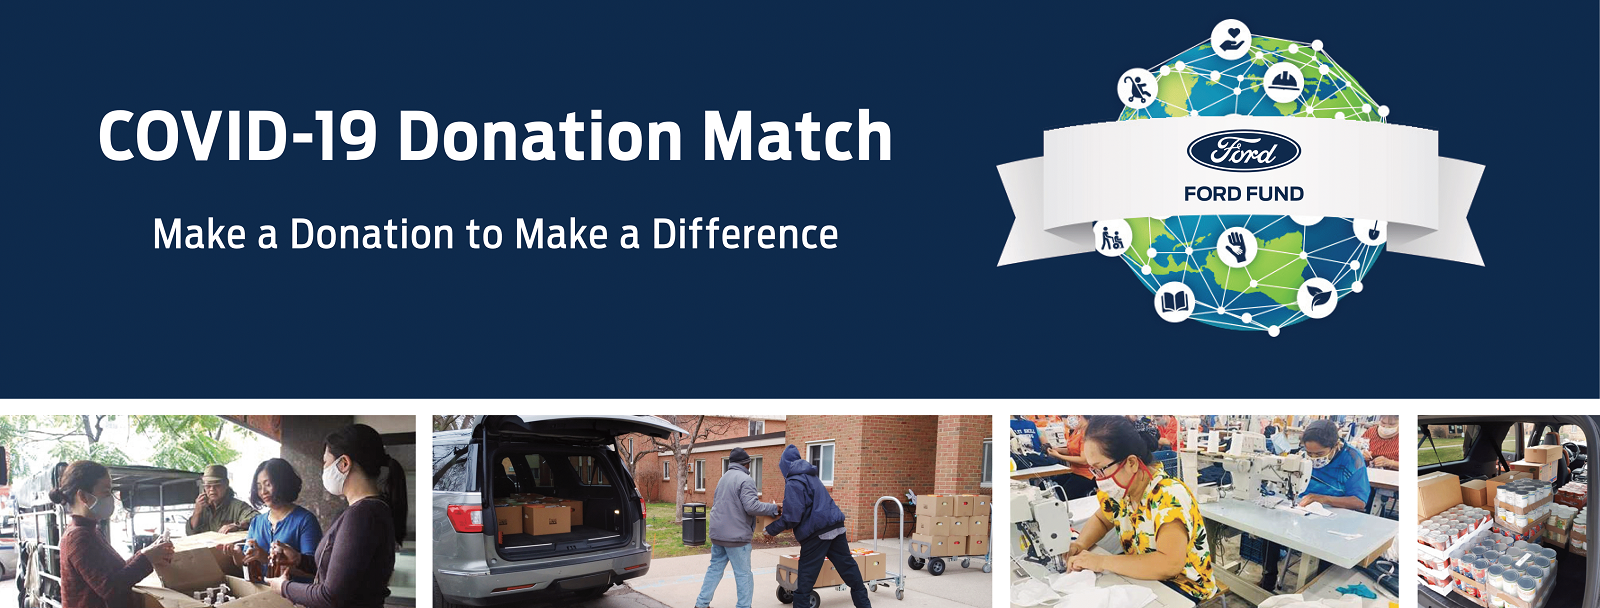 Ford Donation Match for COVID-19, Make a donation to make a difference